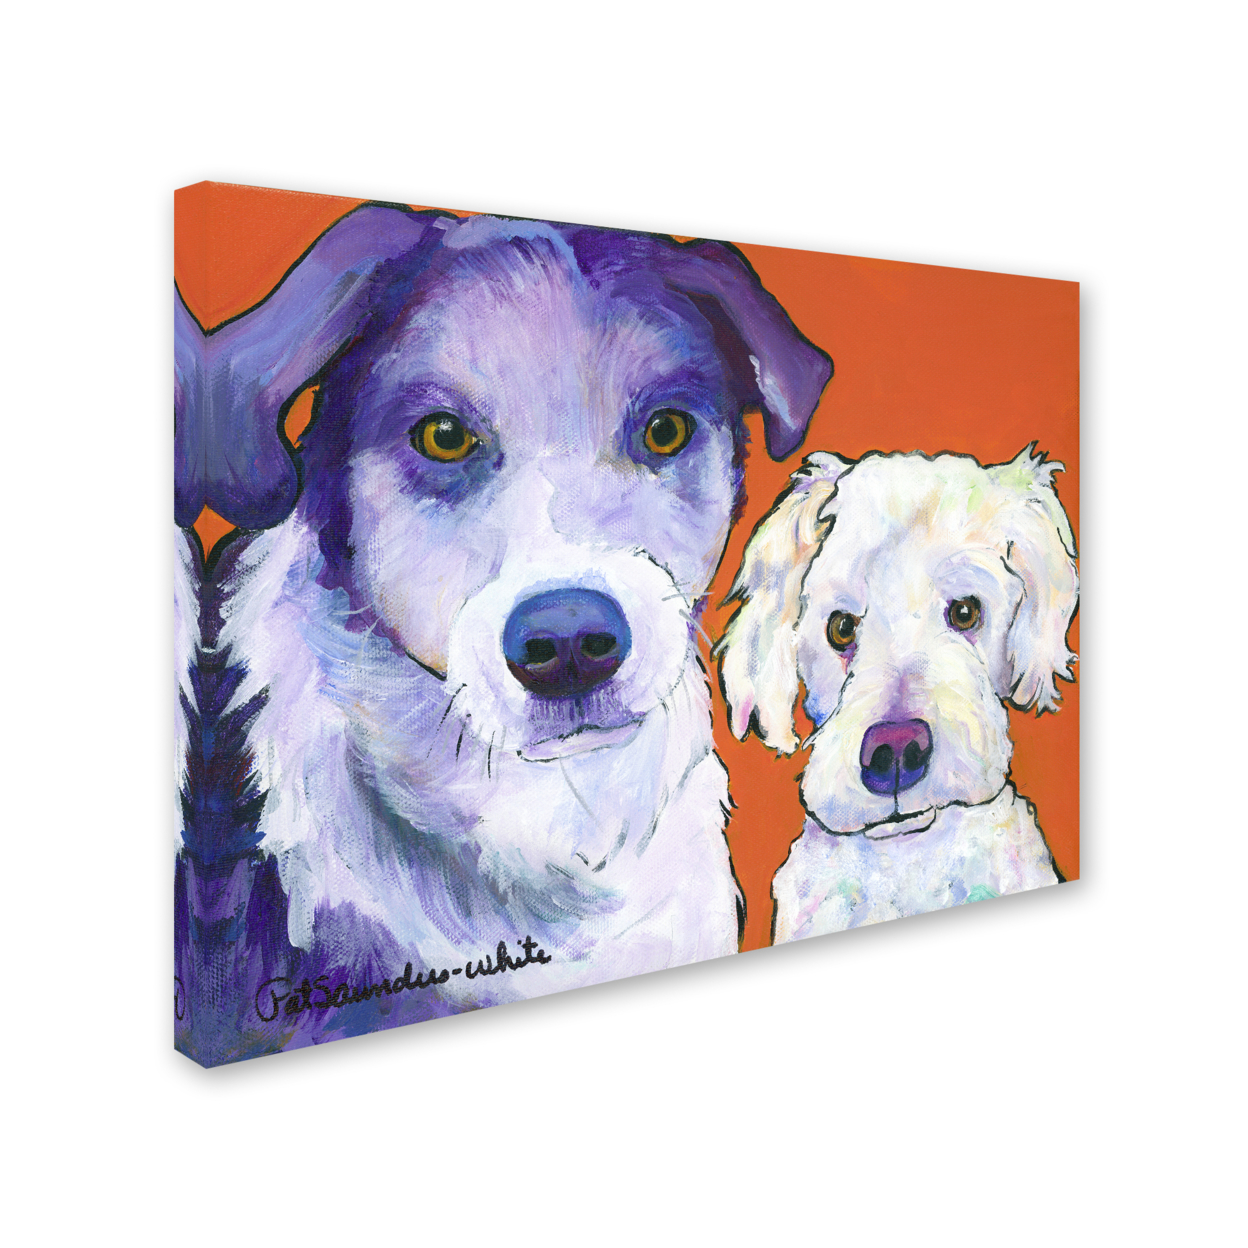 Pat Saunders-White 'Milo And Max' 14 X 19 Canvas Art